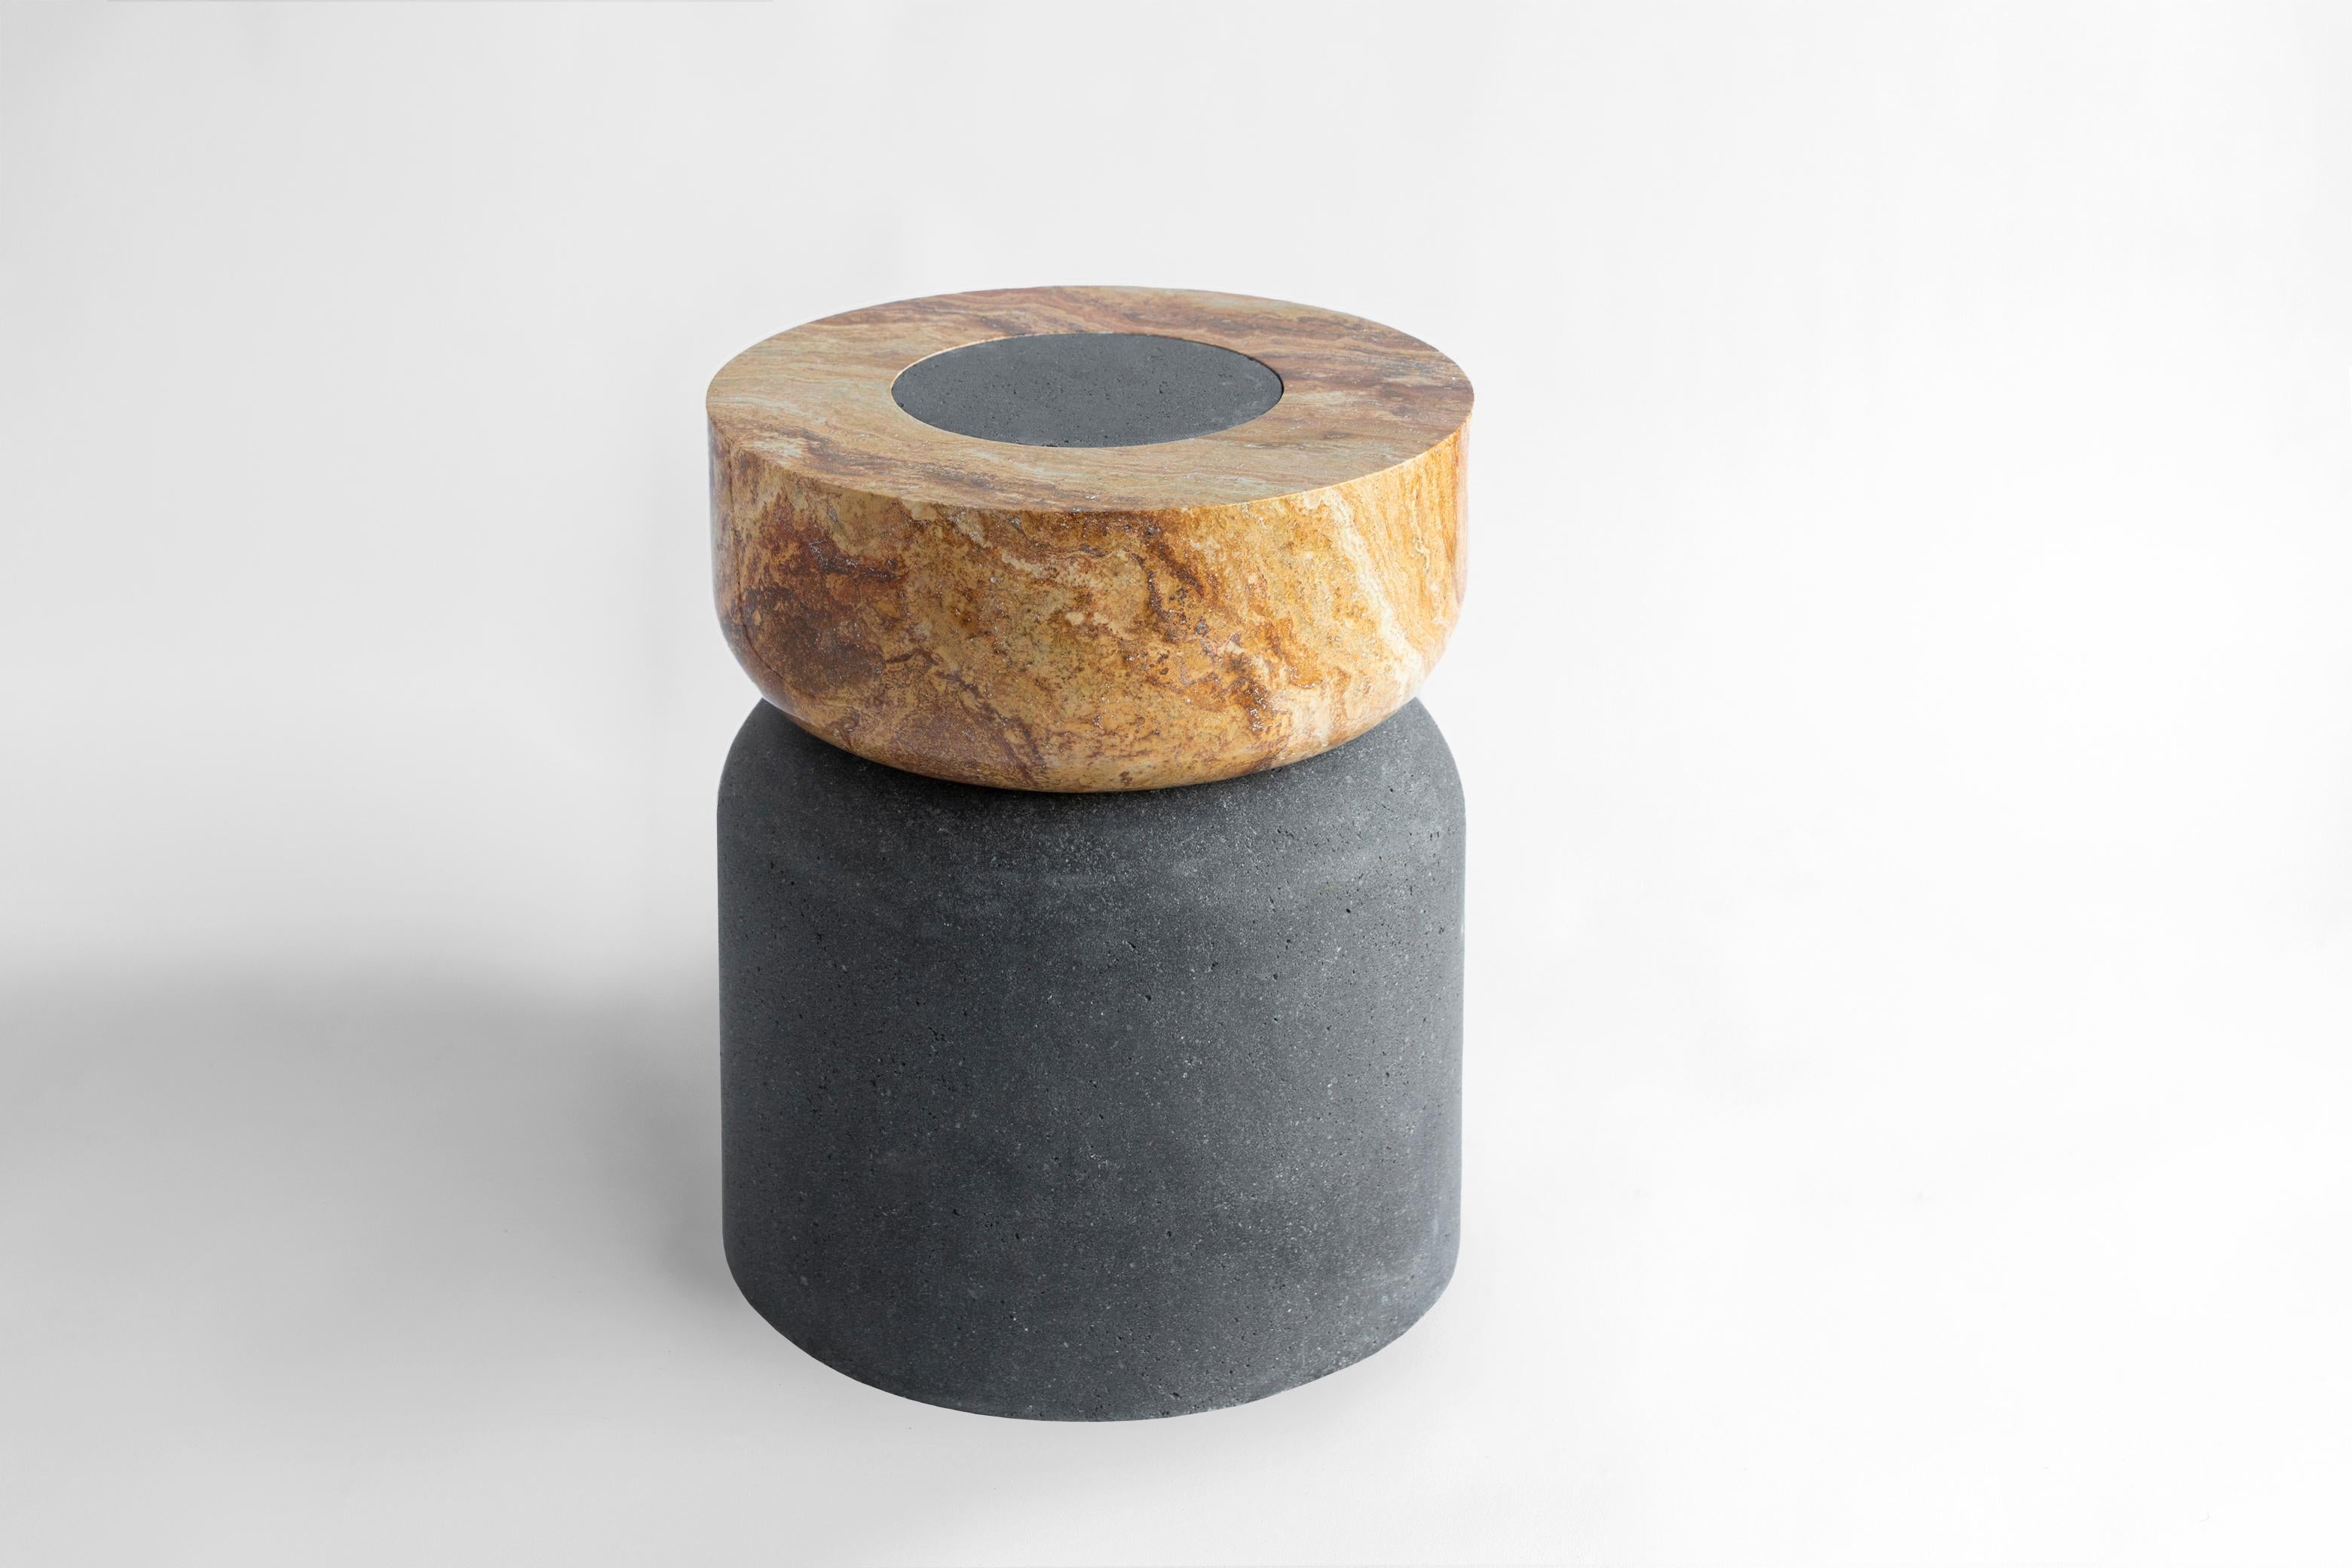 Contemporary Volcanic Shade IV Stool/Table by Sten Studio, Represented by Tuleste Factory